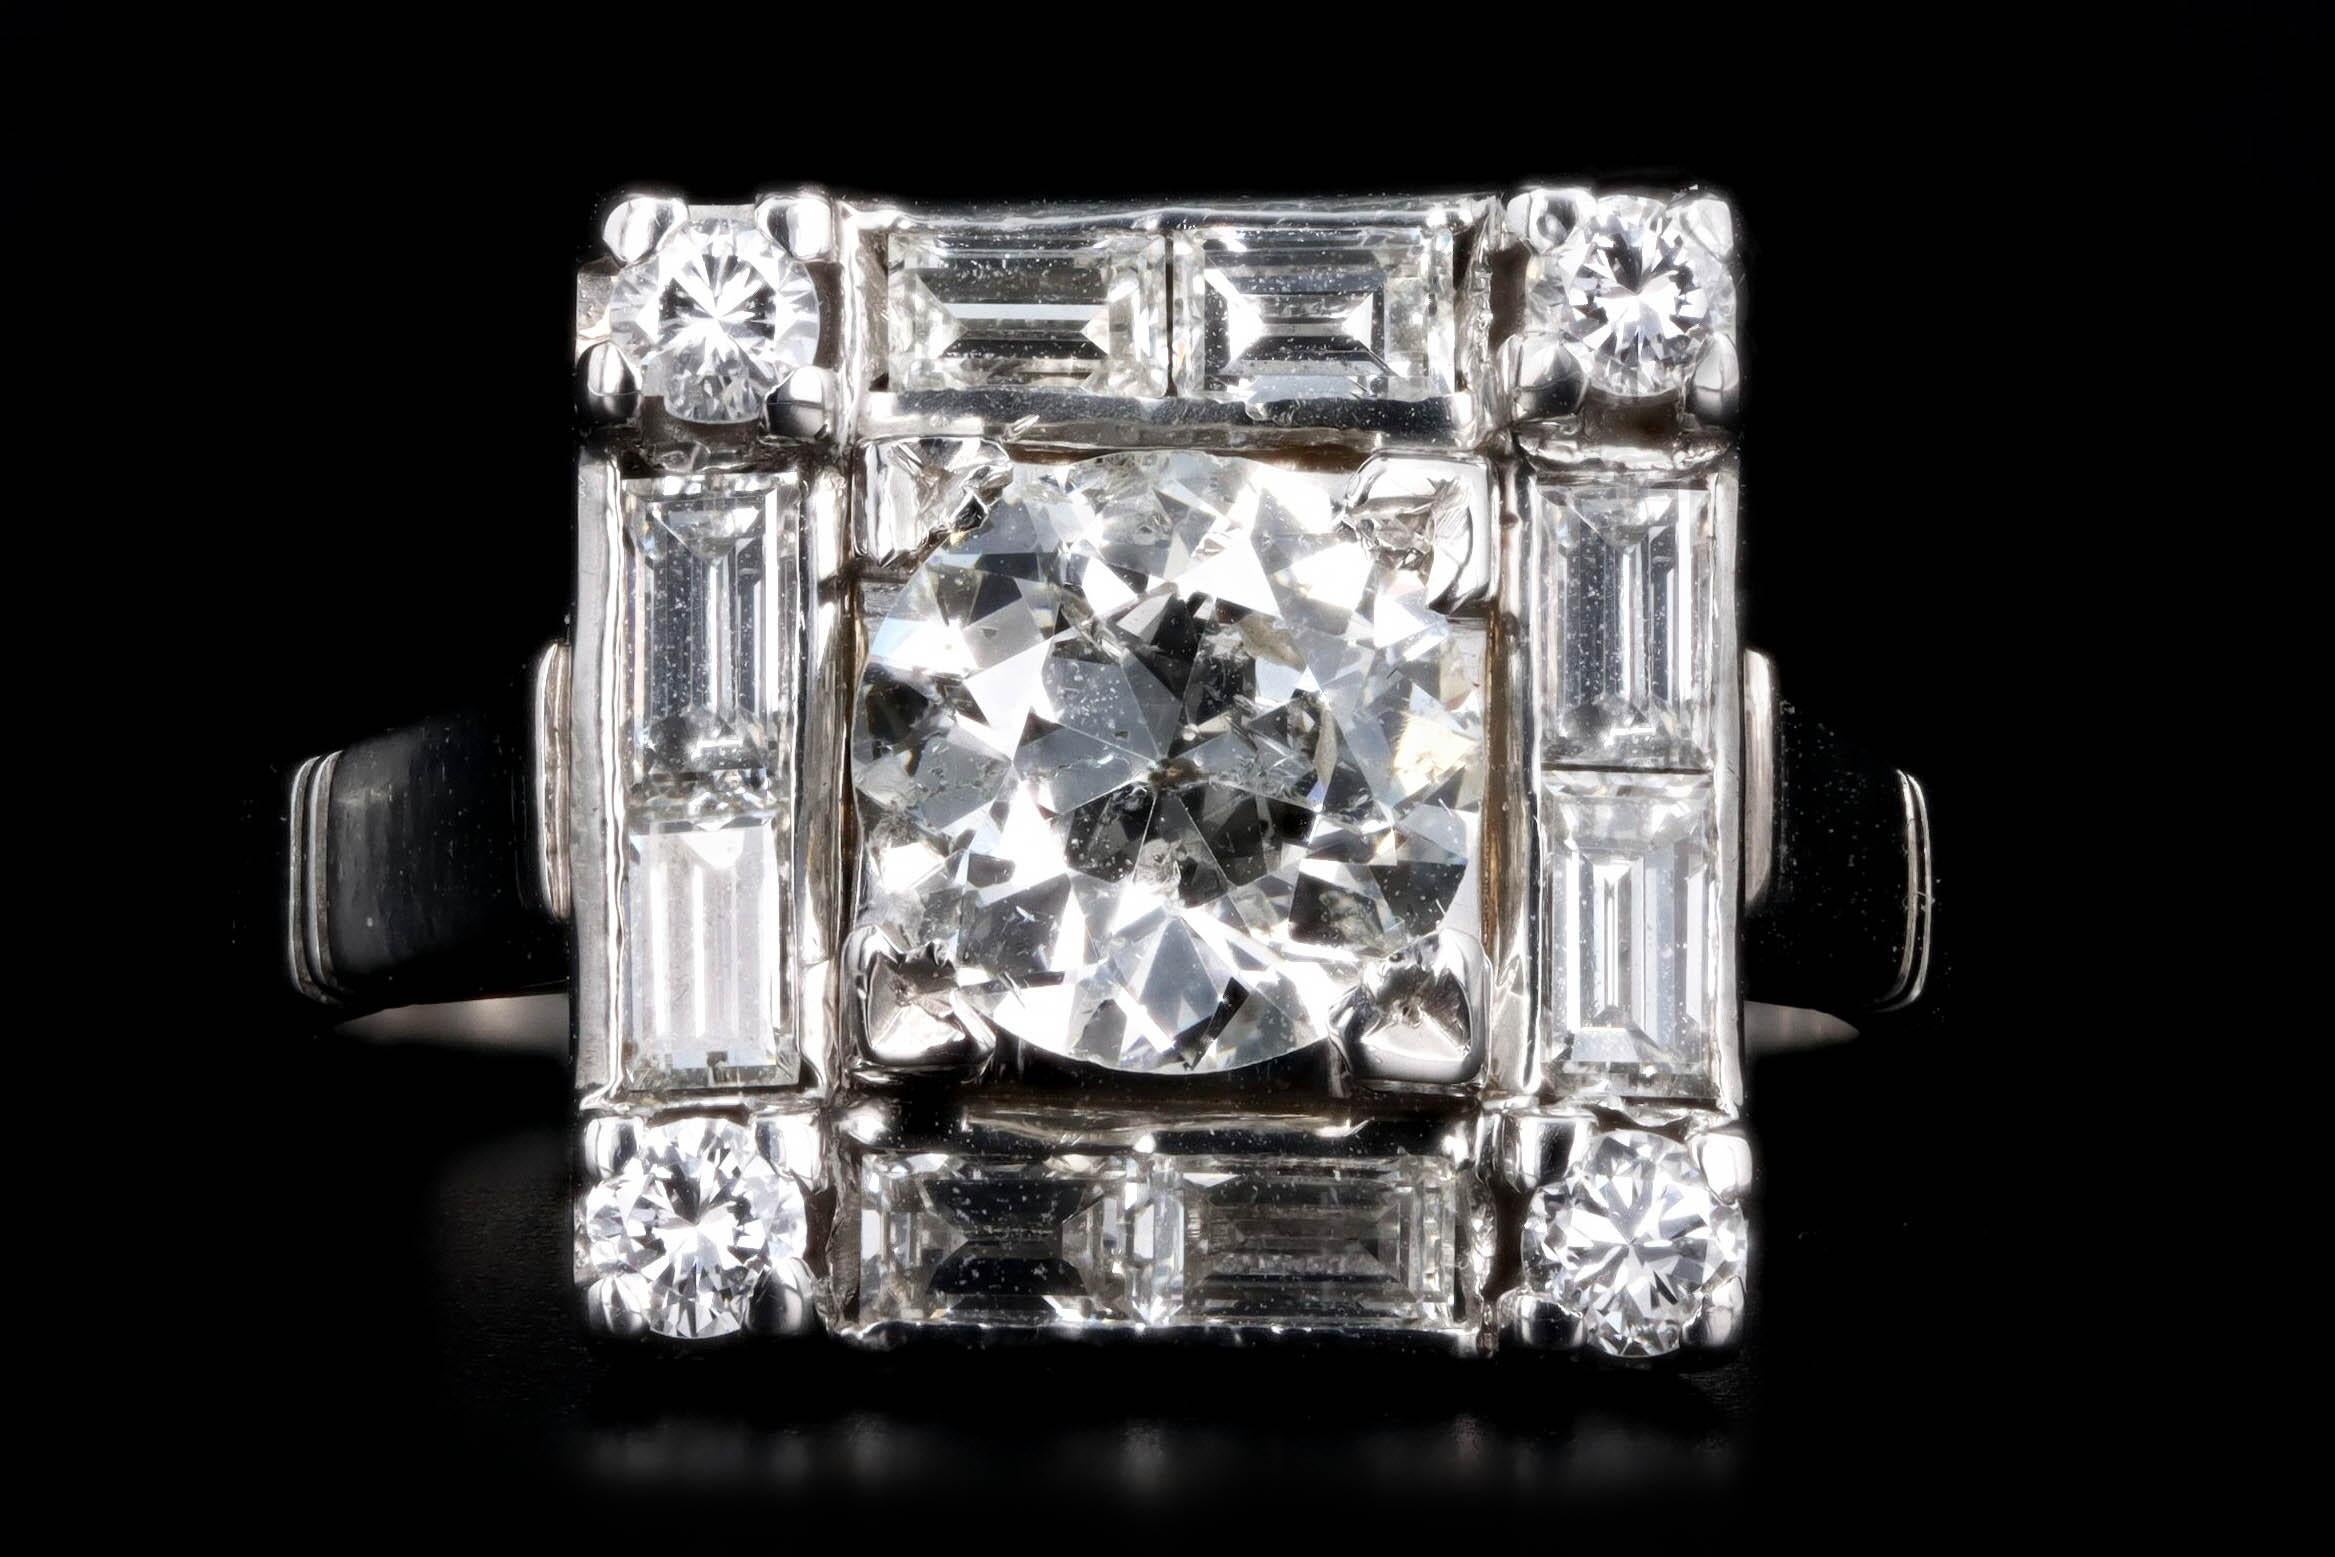 Era: Art Deco

Composition: Platinum

Primary Stone: Old European Cut Diamond

Carat Weight: Approximately 1 Carat 

Color/ Clarity: I / I1

Accent Stone: Four Round & Eight Baguette Cut Diamonds

Carat Weight: Approximately .65 Carats in